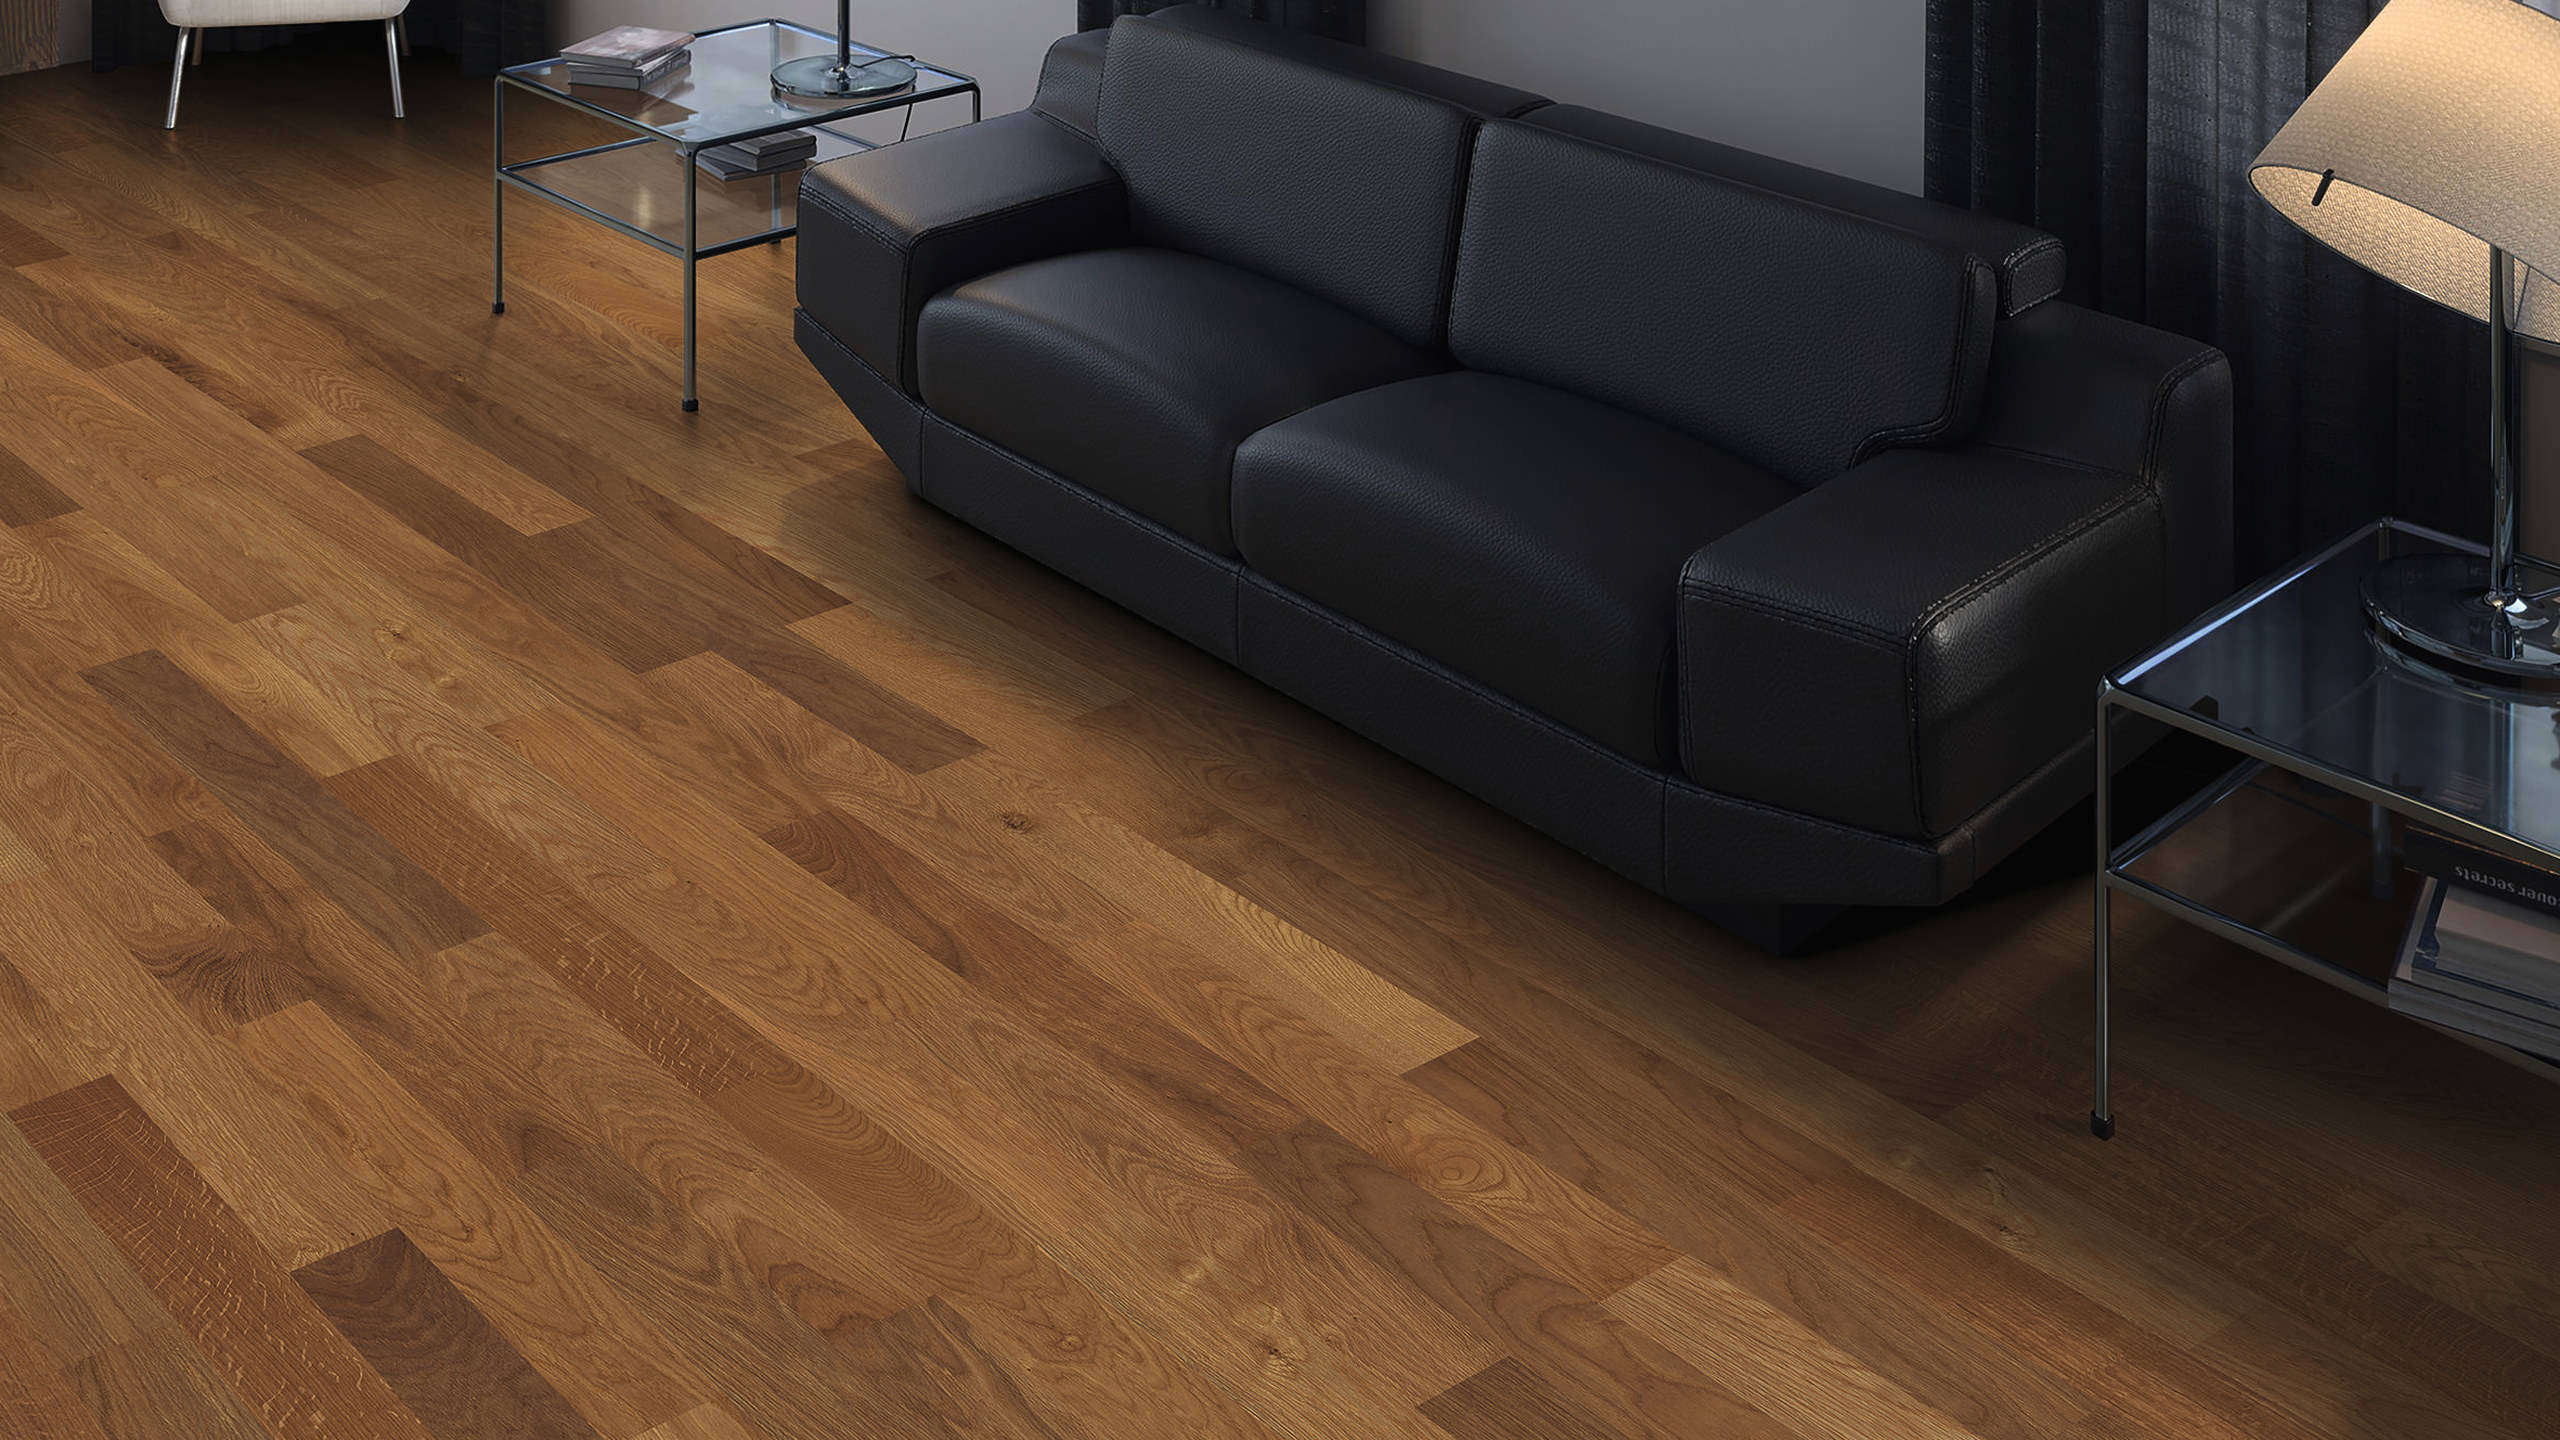 HARO PARQUET 4000 Strip Classico Smoked Oak Naturale brushed naturaLin plus Tongue and Groove